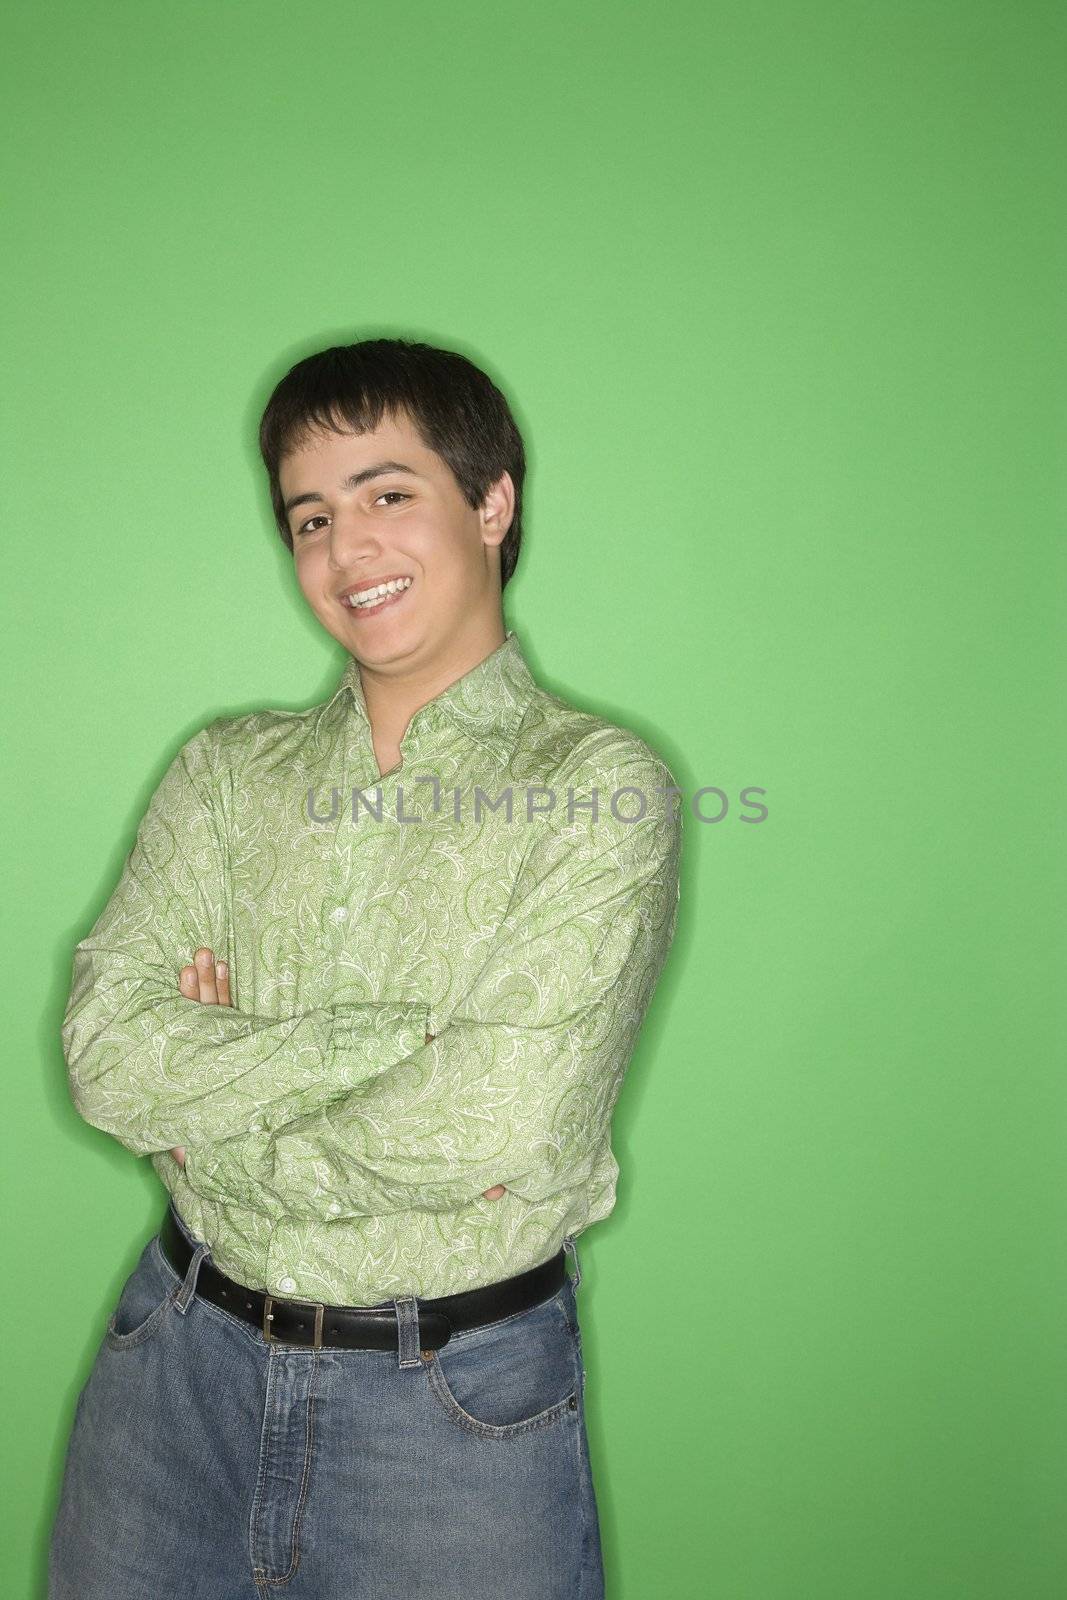 Portrait of Caucasian teen boy smiling with crossed arms standing against green background.l